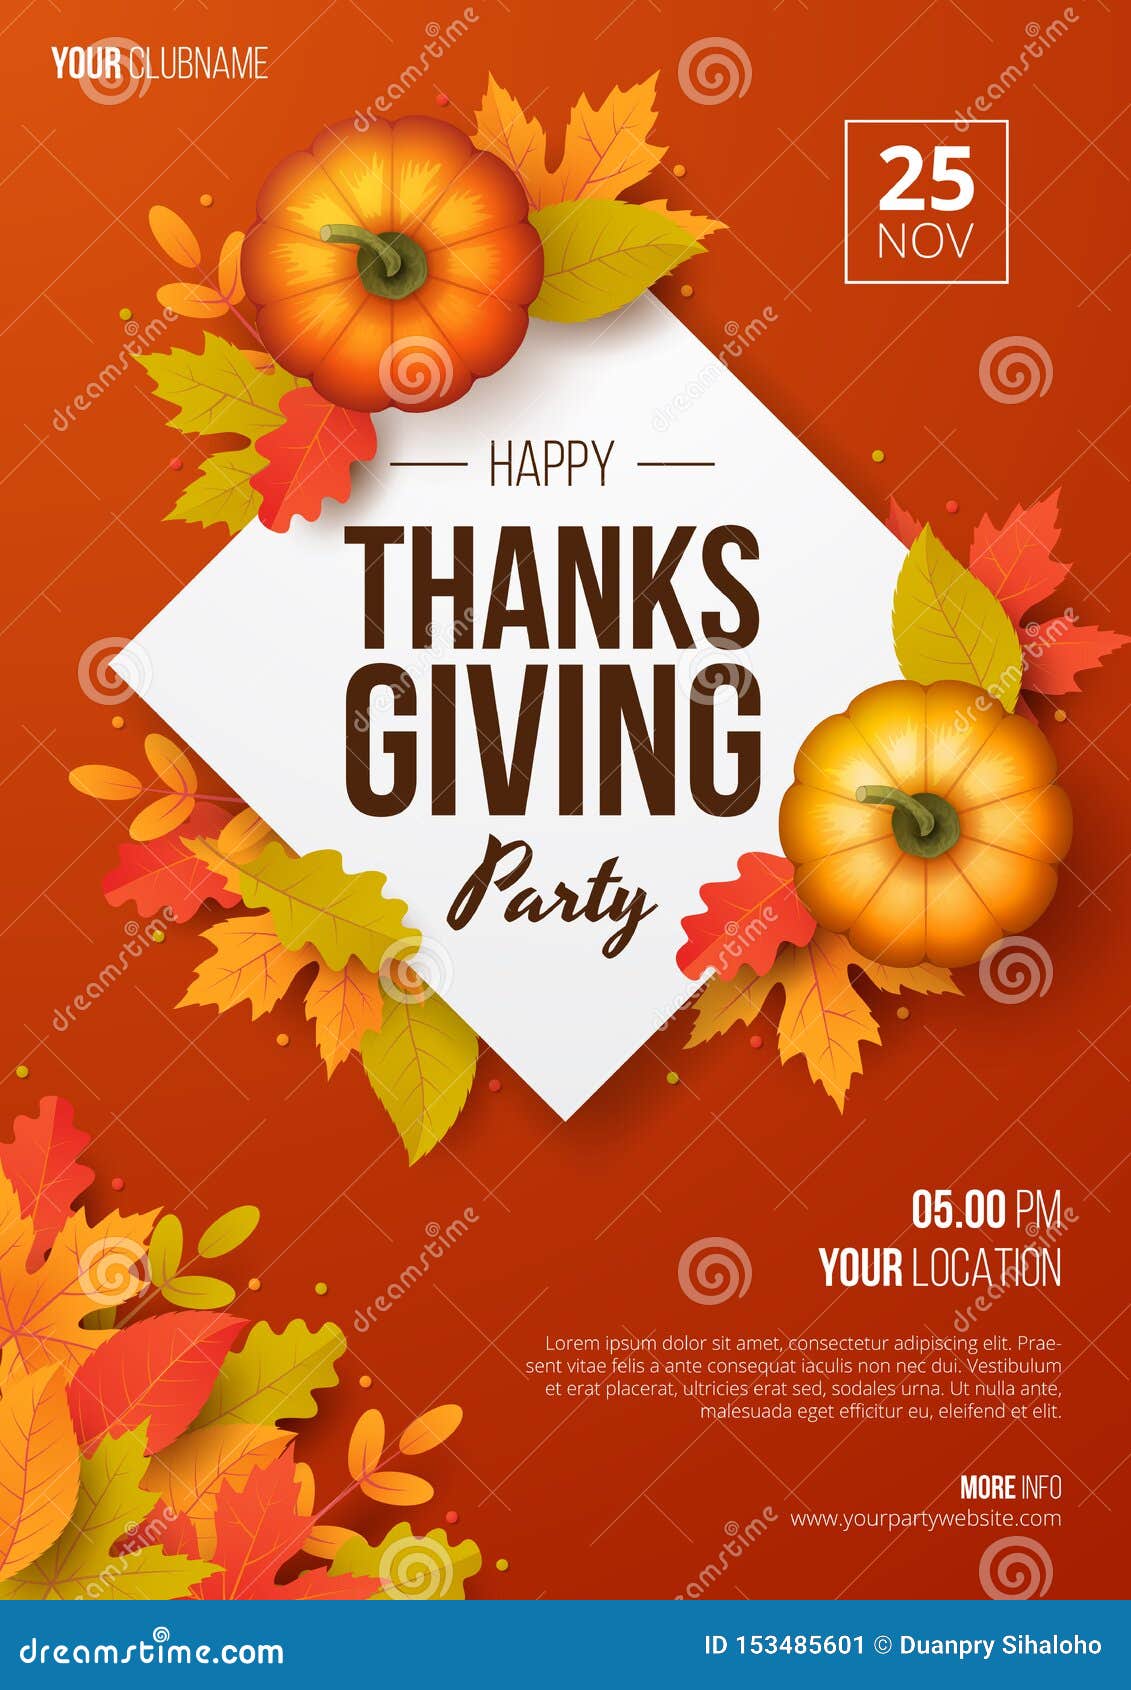 22 Thanksgiving Party Flyer Photos - Free & Royalty-Free Stock Throughout Thanksgiving Flyer Template Free Download